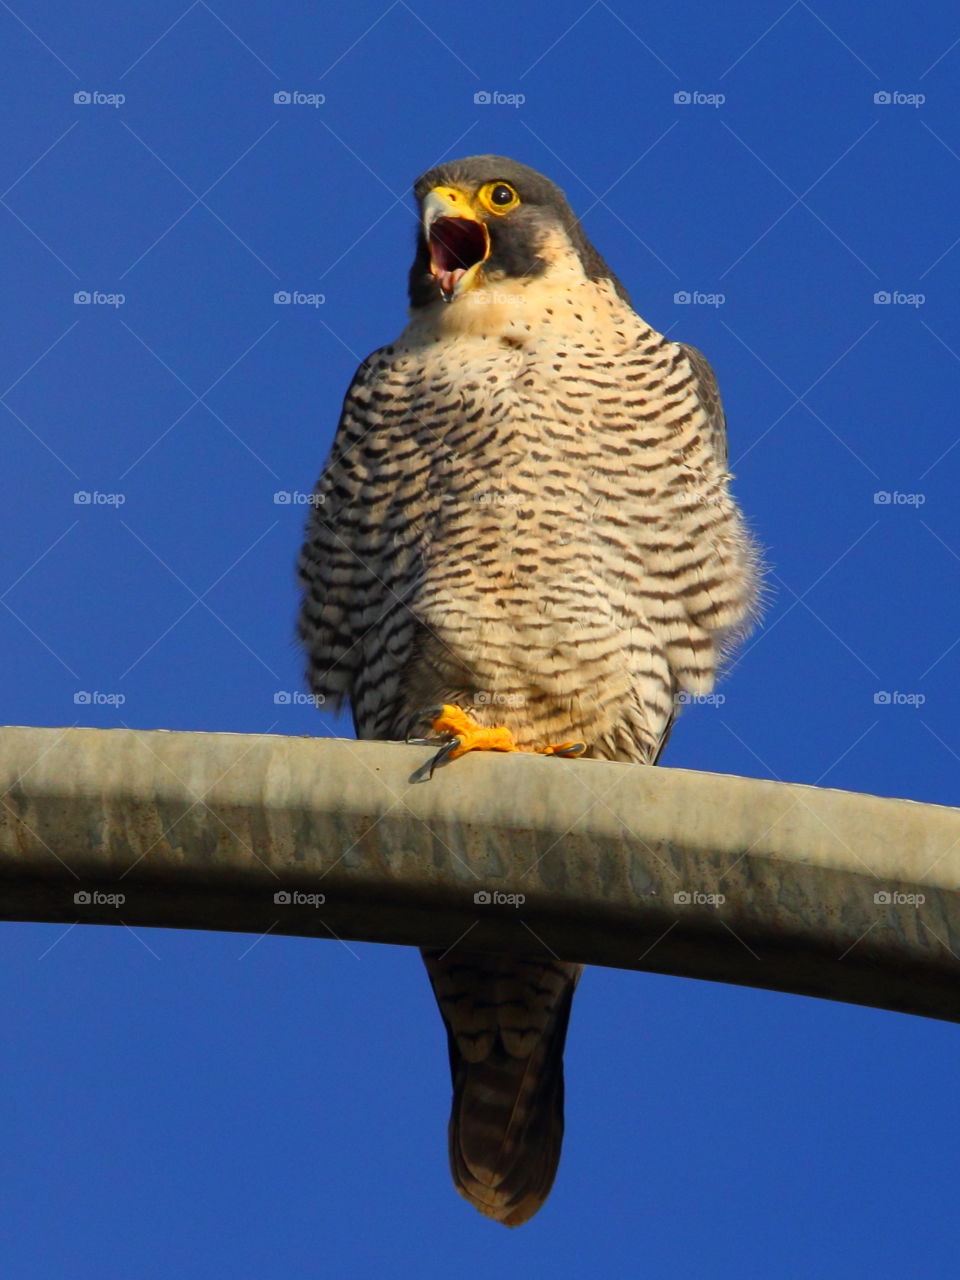 Low angle view of peregrine falcon bird against clear sky